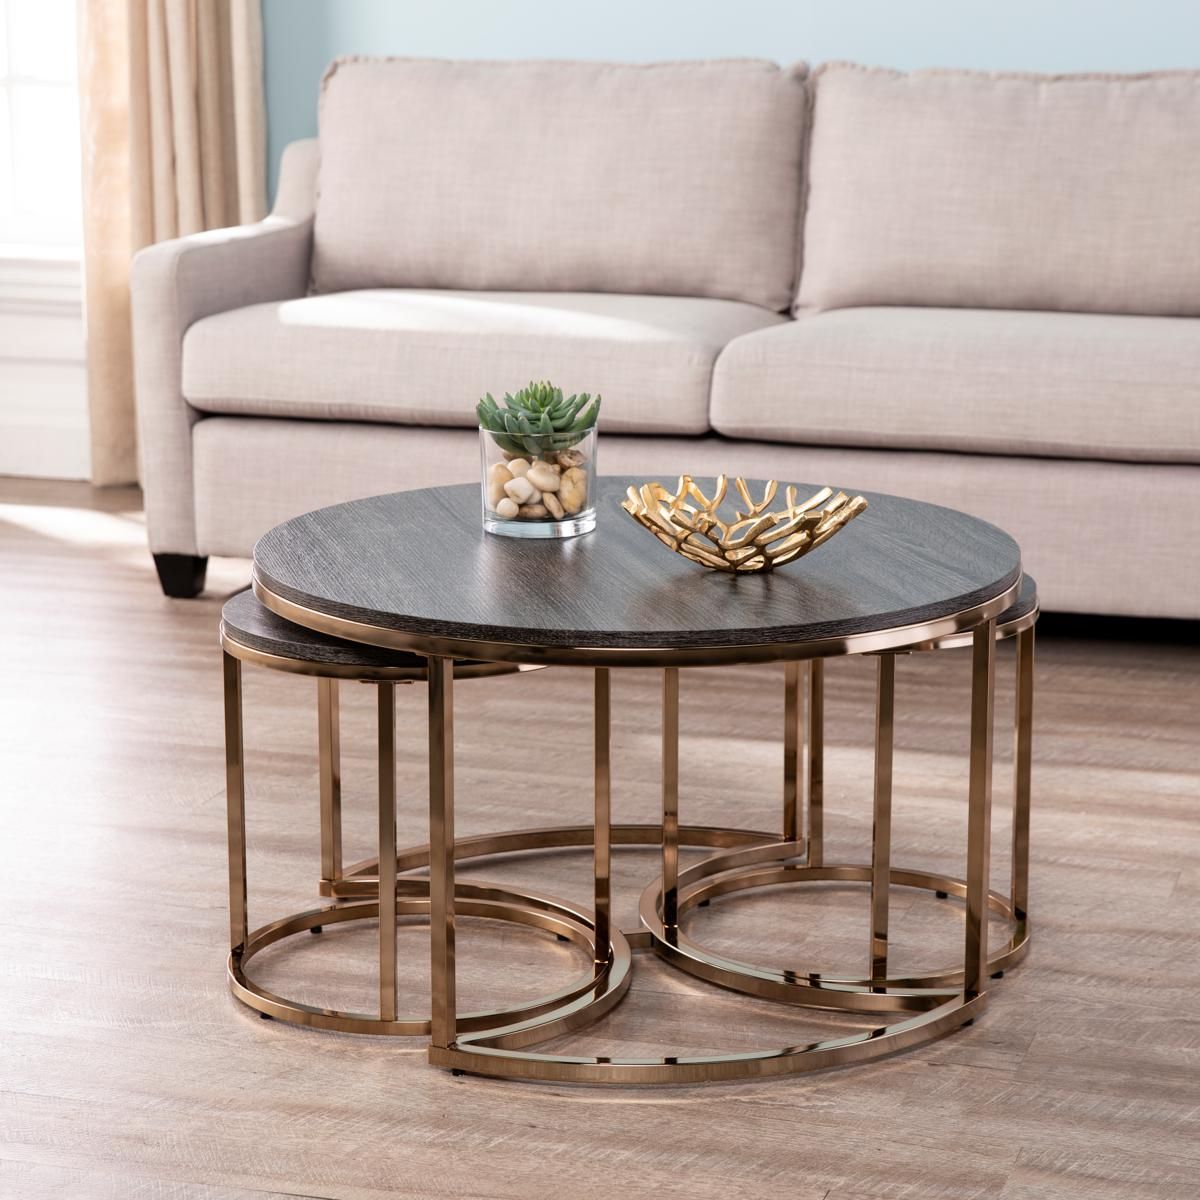 Lakenheath 3 Piece Nesting Cocktail Table Set – Champagne – 9248247 | Hsn Within Coffee Tables Of 3 Nesting Tables (Photo 13 of 15)